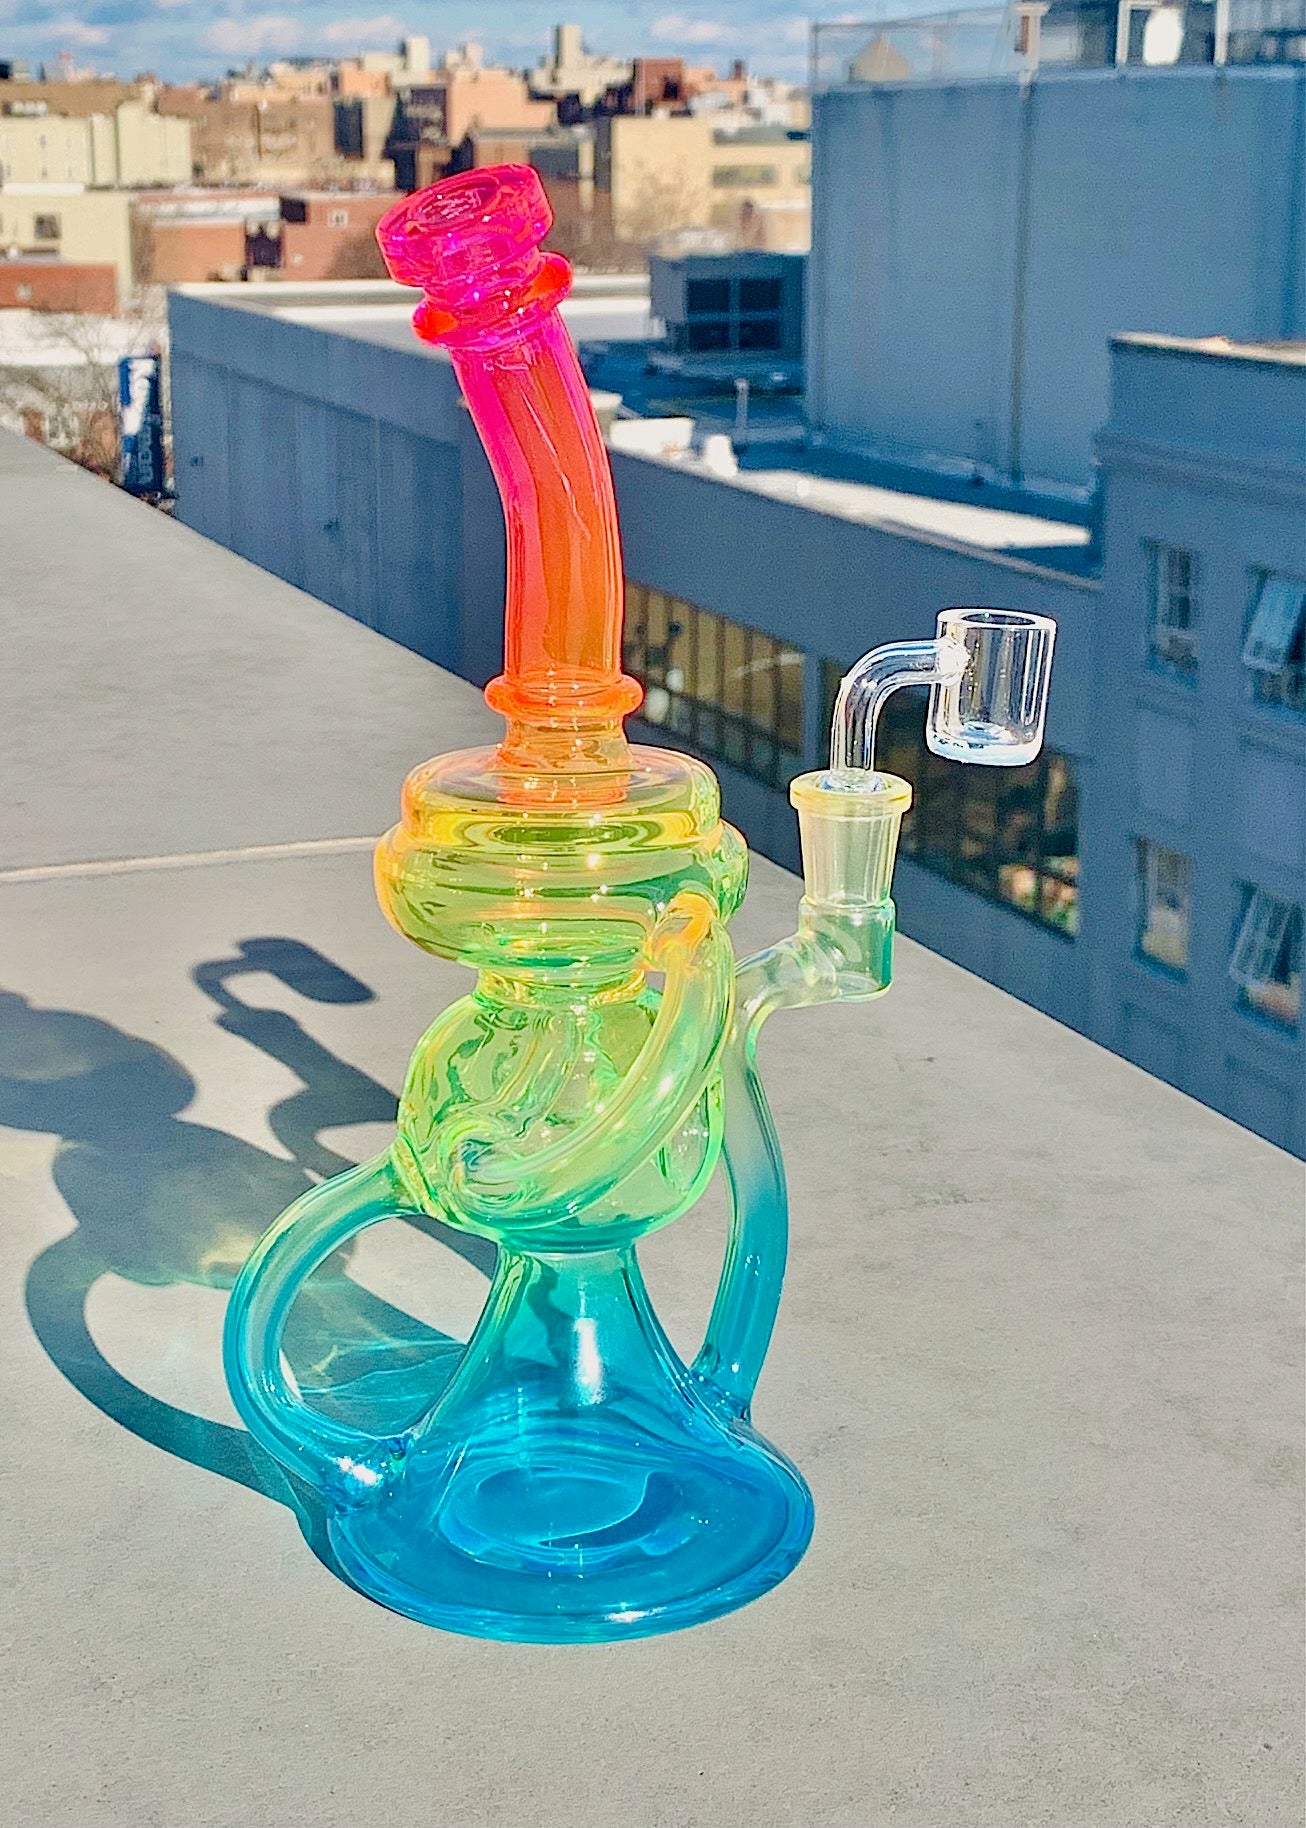 Shop Rainbow Glass Pipe Online